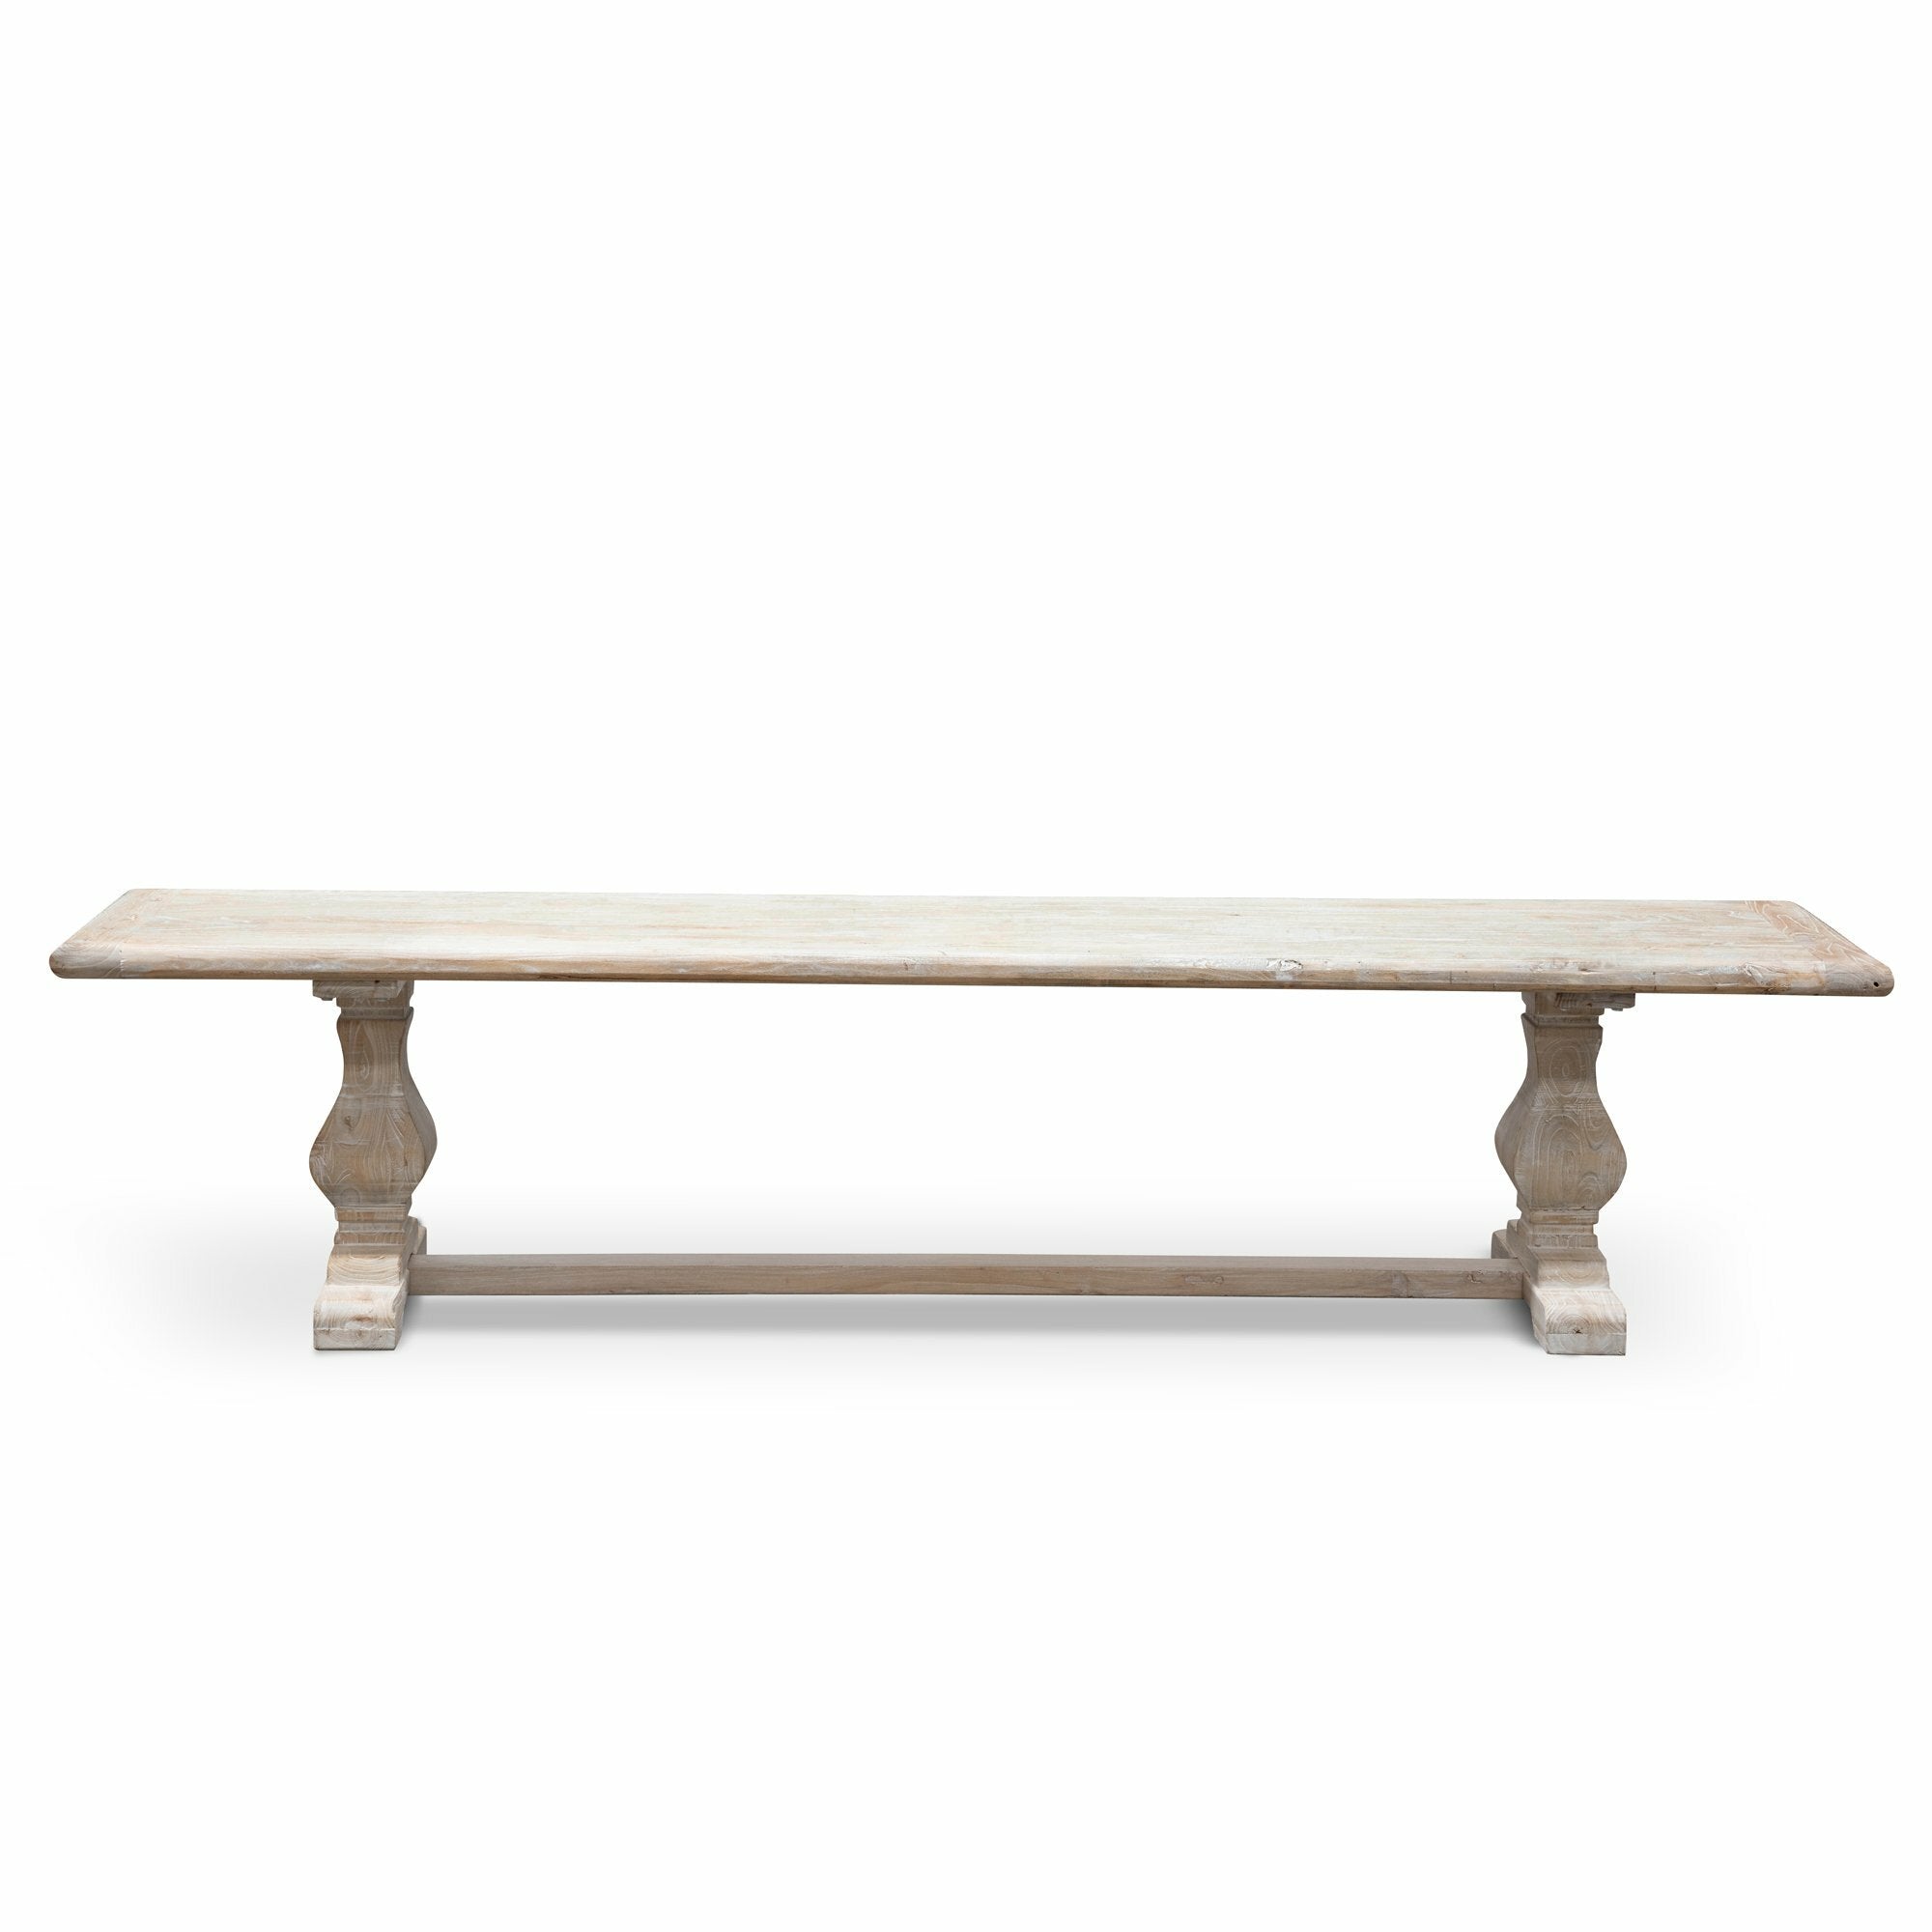 Titan 2m Reclaimed ELM Wood Bench - White Washed